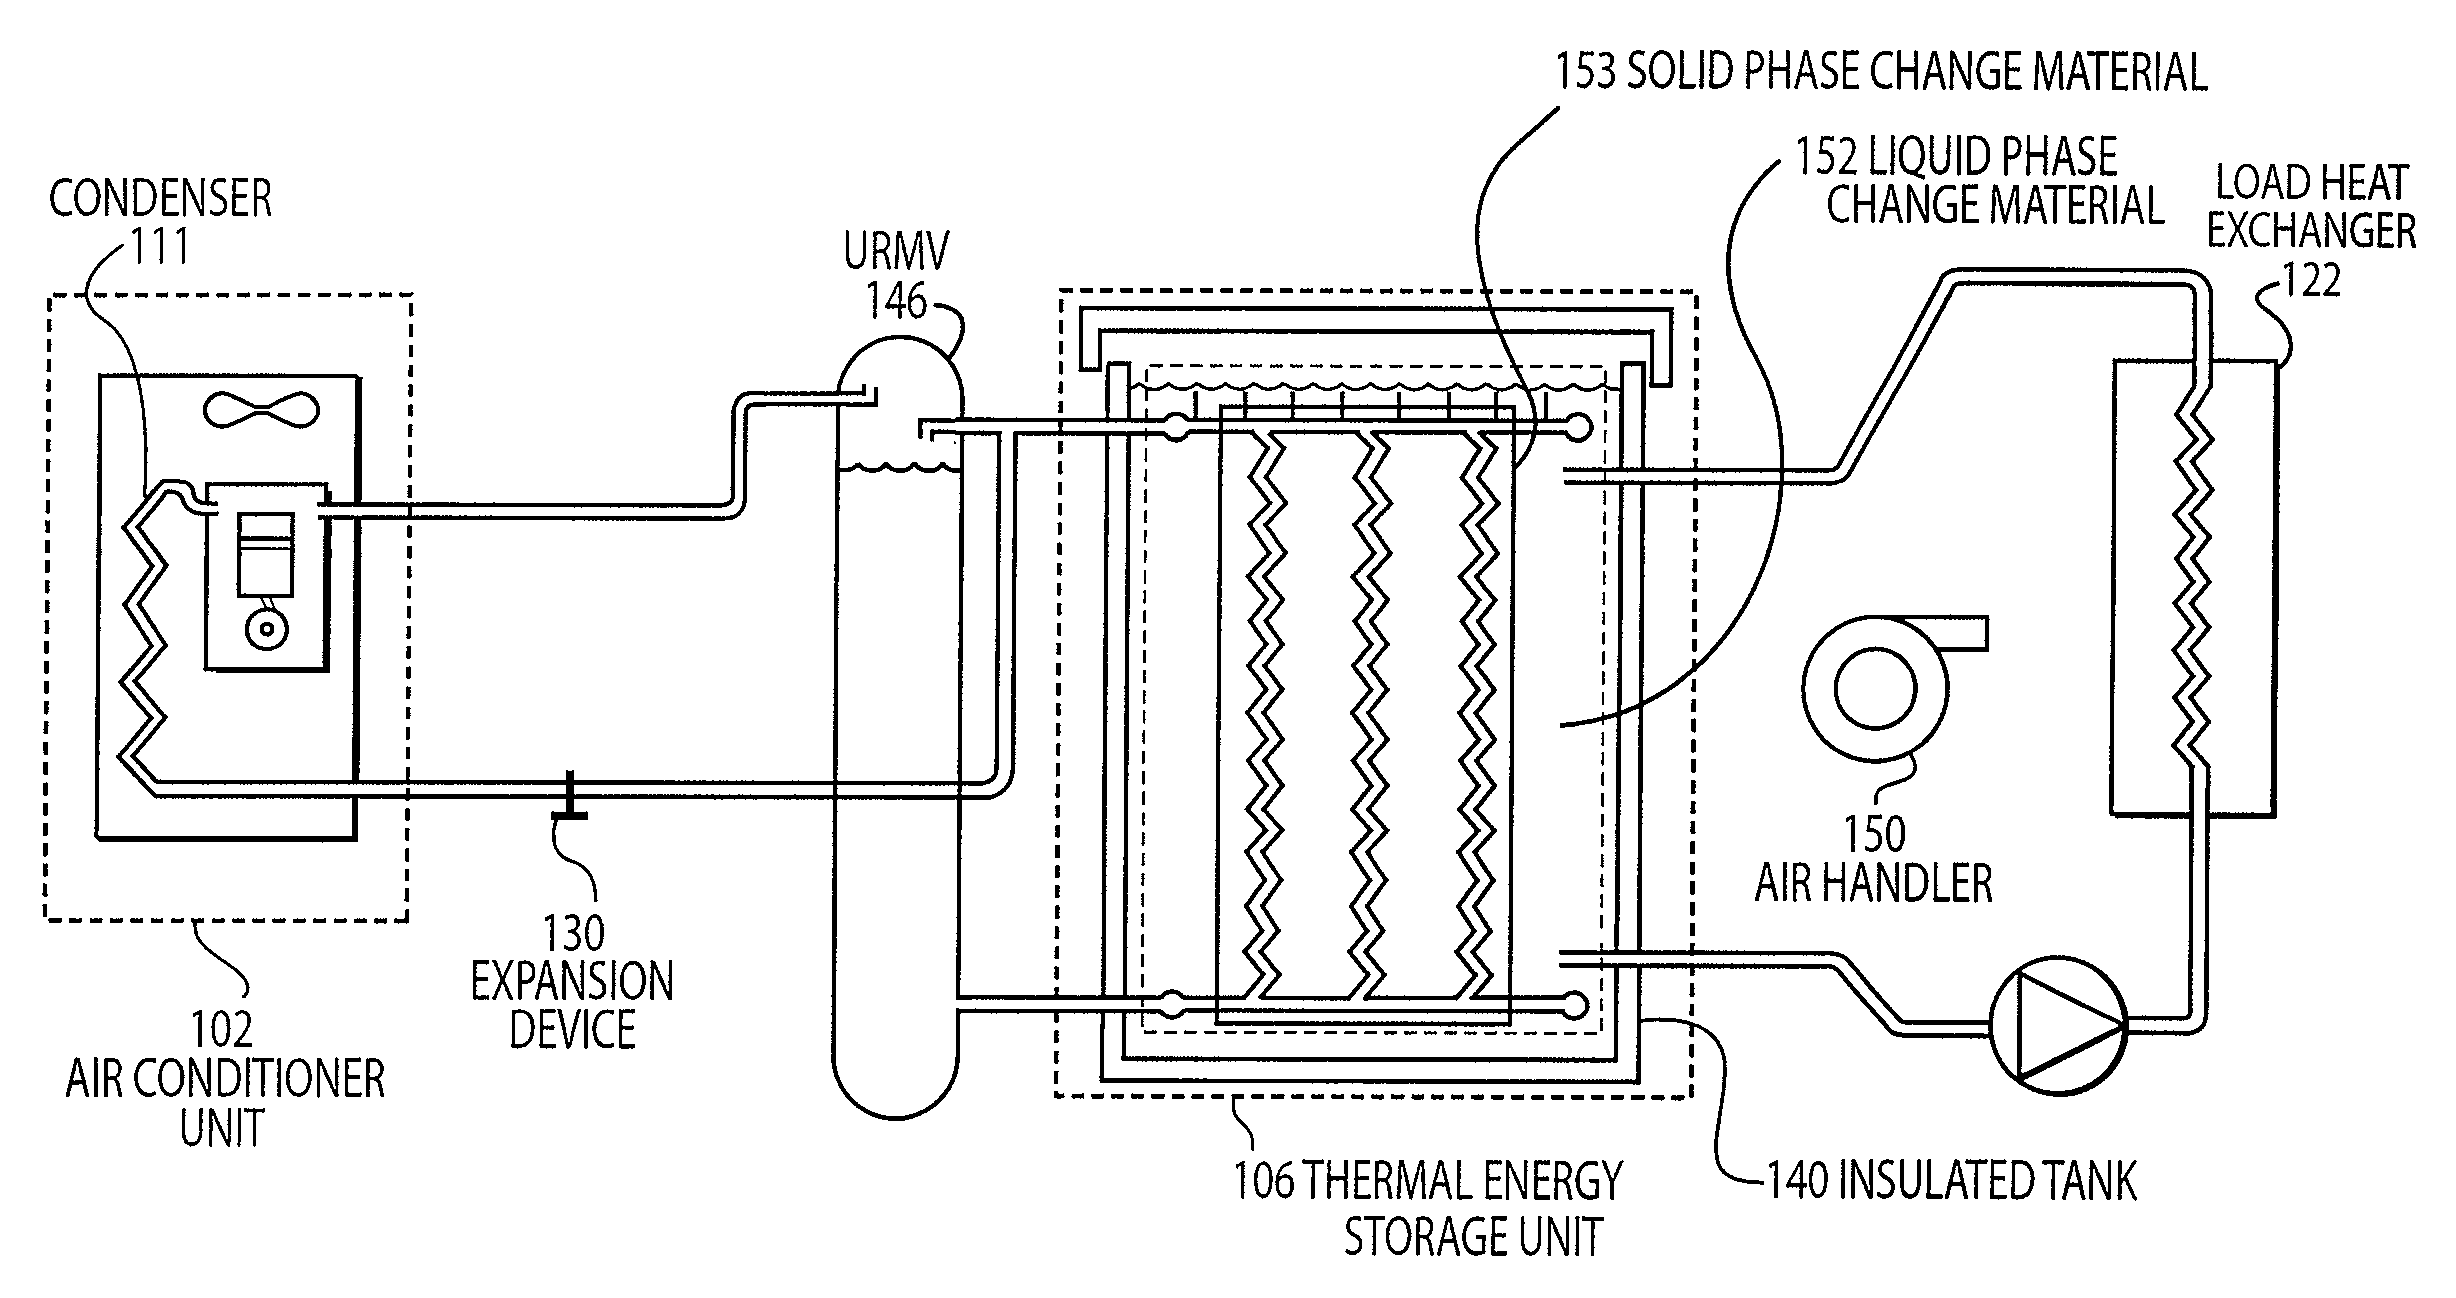 Thermal energy storage and cooling system with isolated external melt cooling